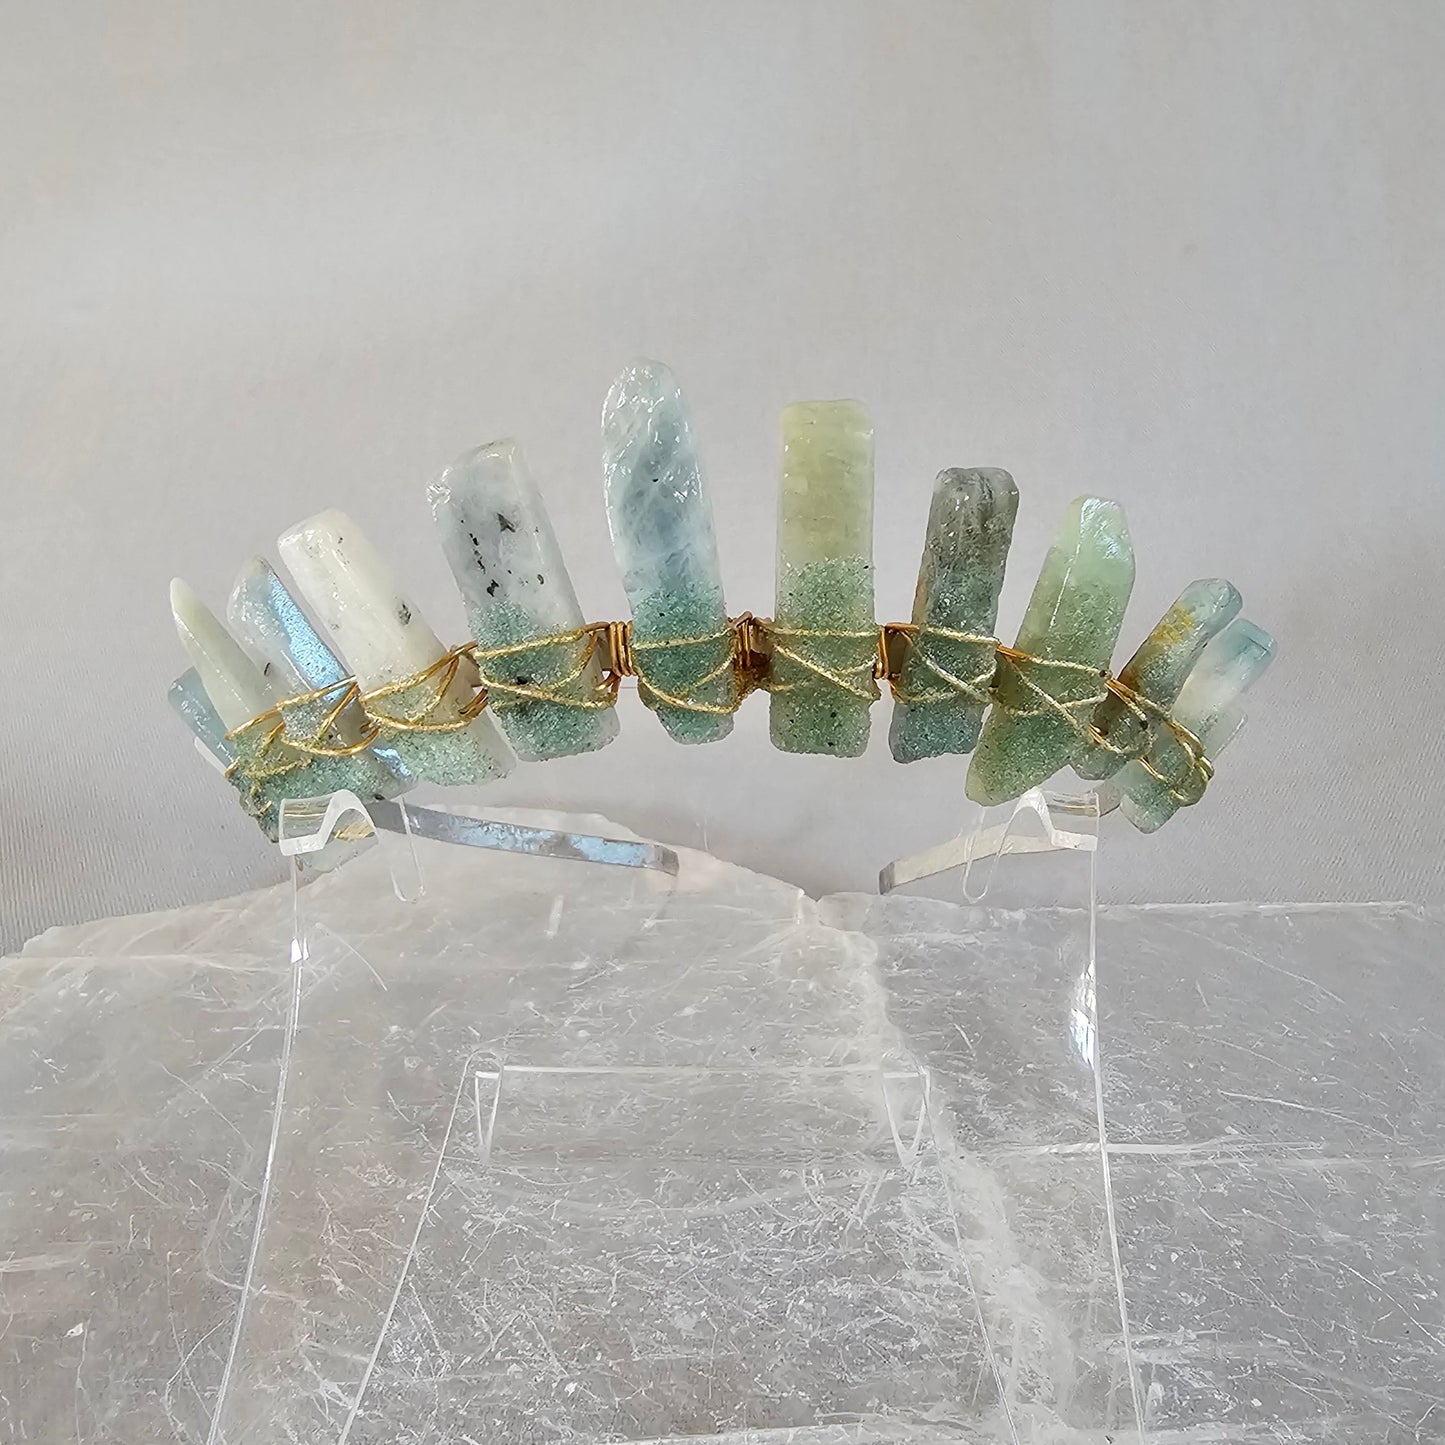 Aquamarine Crystal Crown Embellished with Green Aventurine for Protection & Creativity